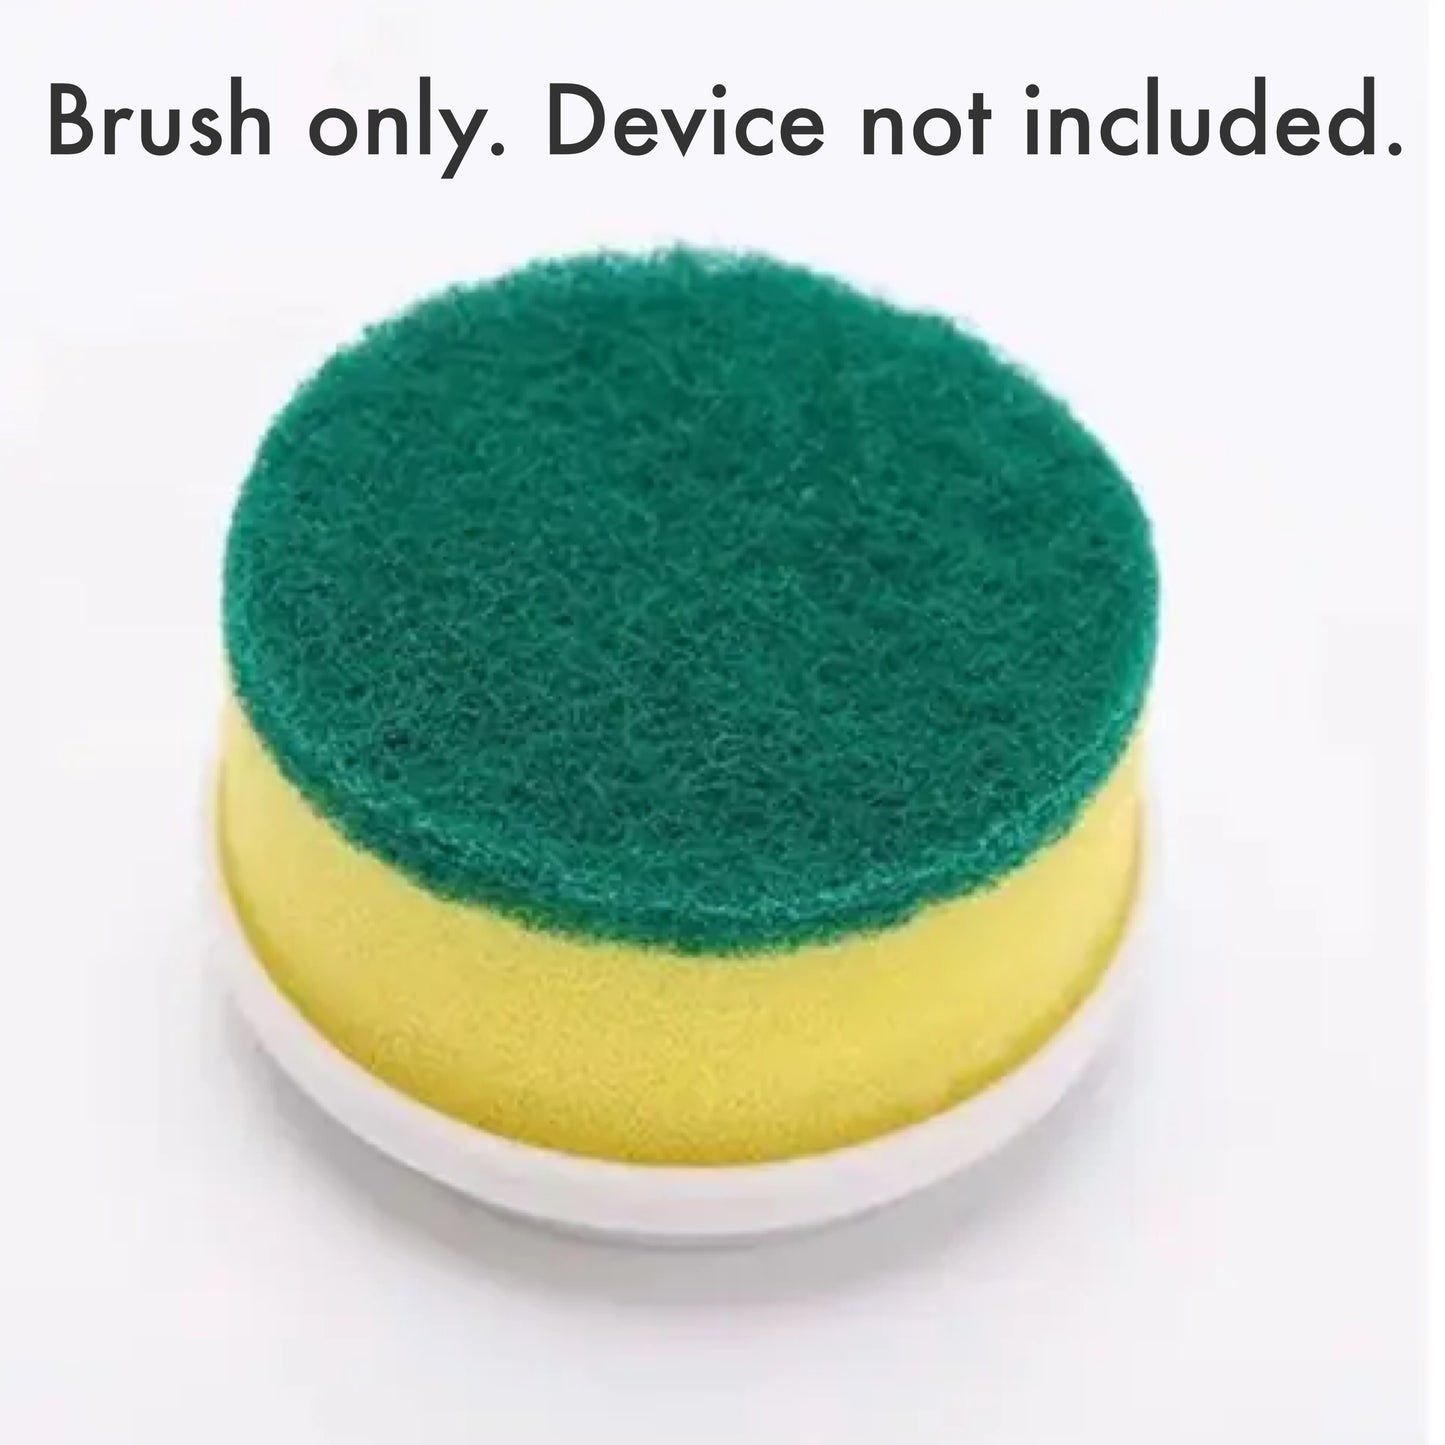 Wonder Scrubber - Electric Spin Scrubber for Dishes and Home